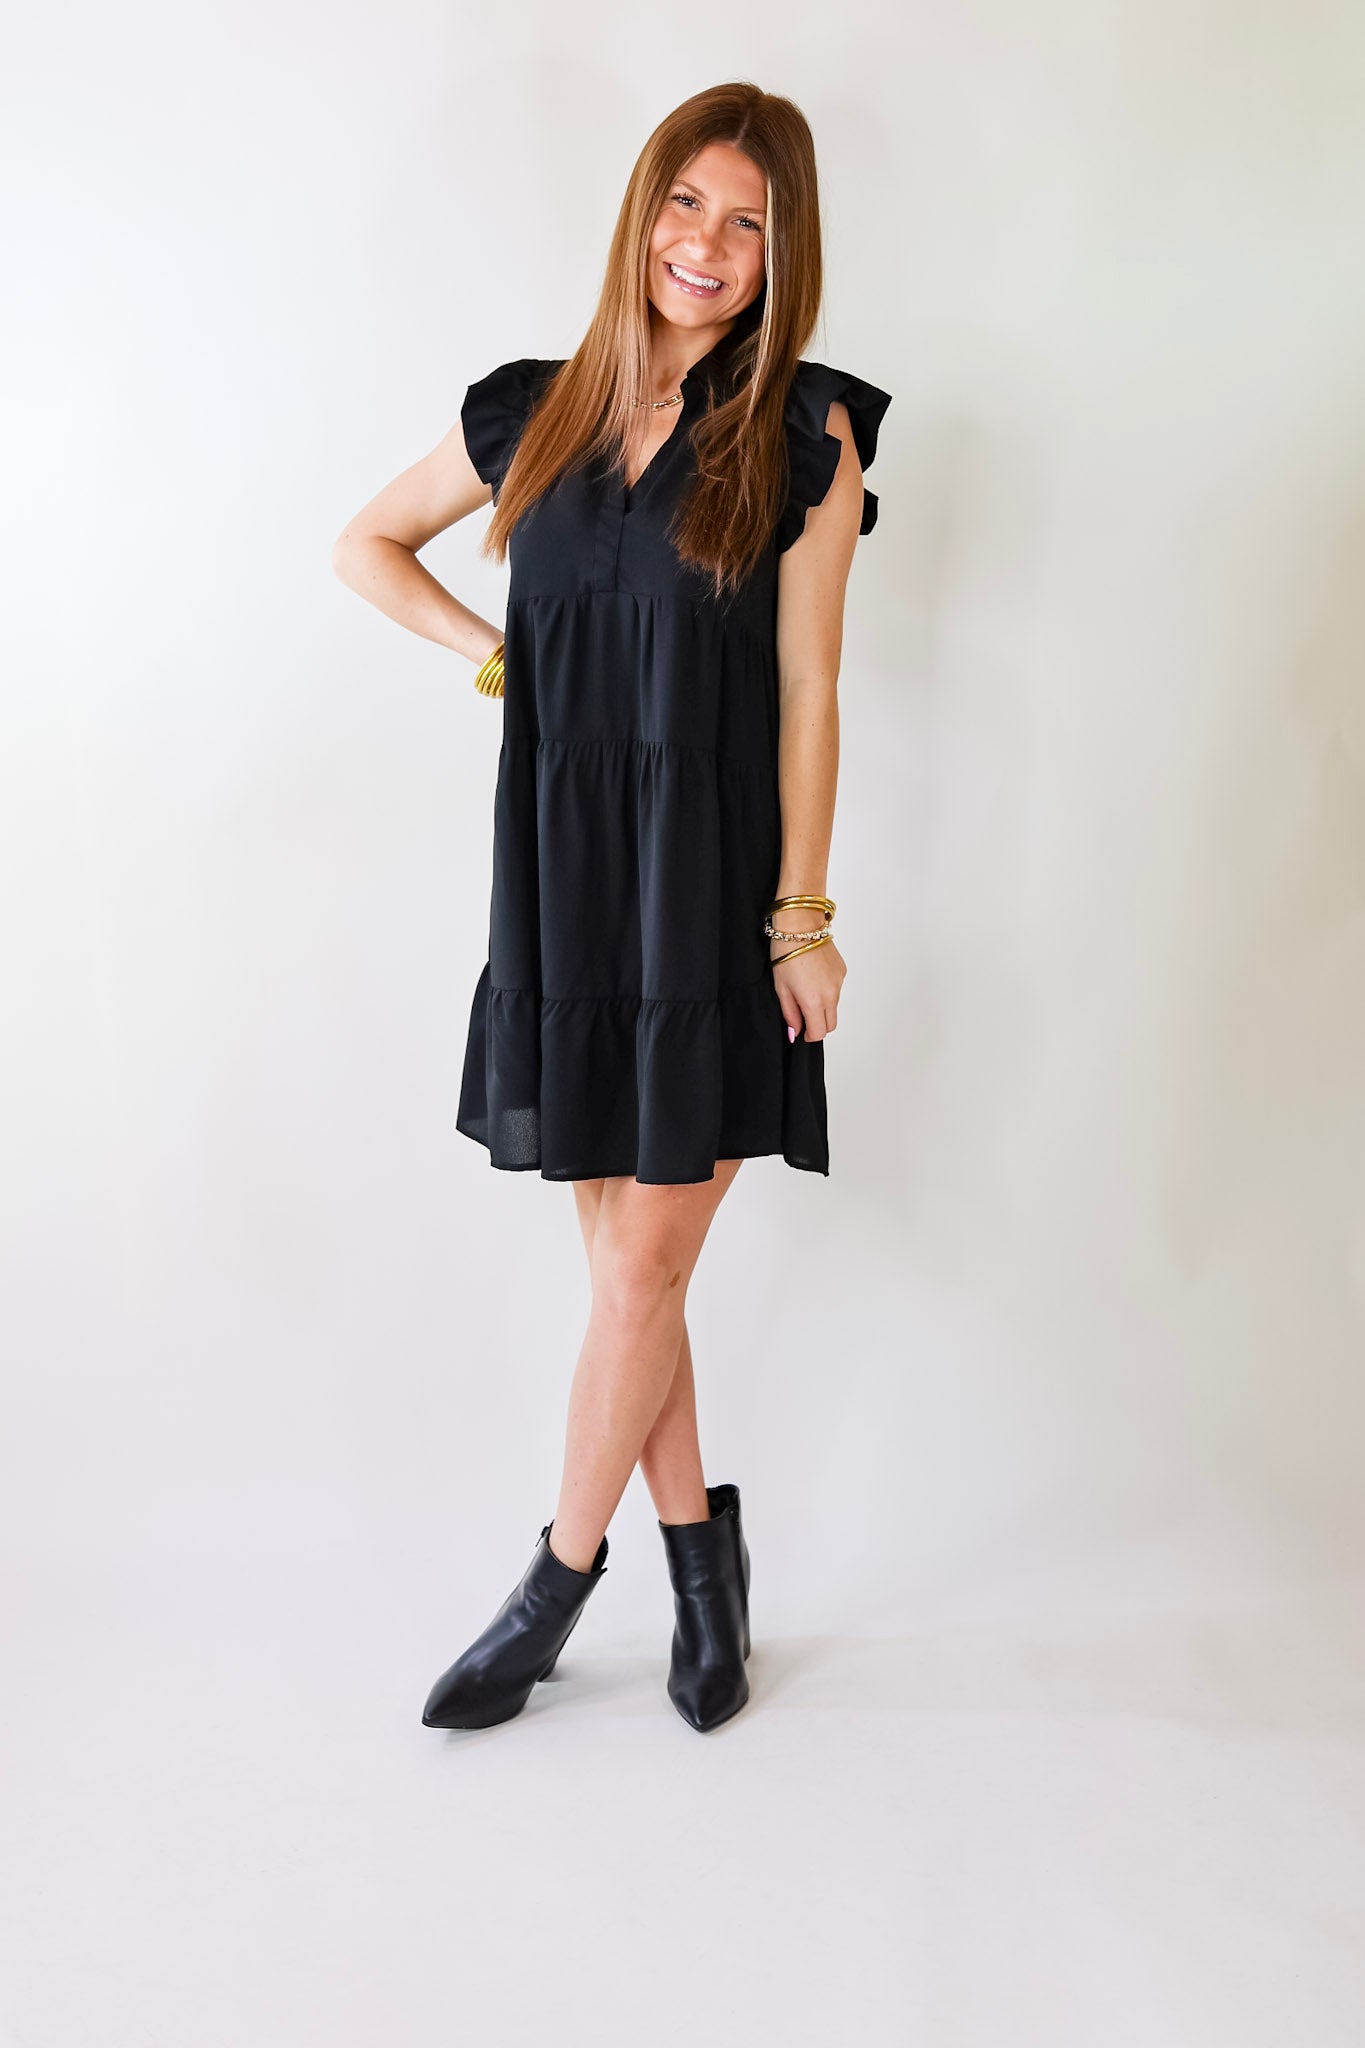 All Of A Sudden Ruffle Cap Sleeve Short Dress in Black - Giddy Up Glamour Boutique